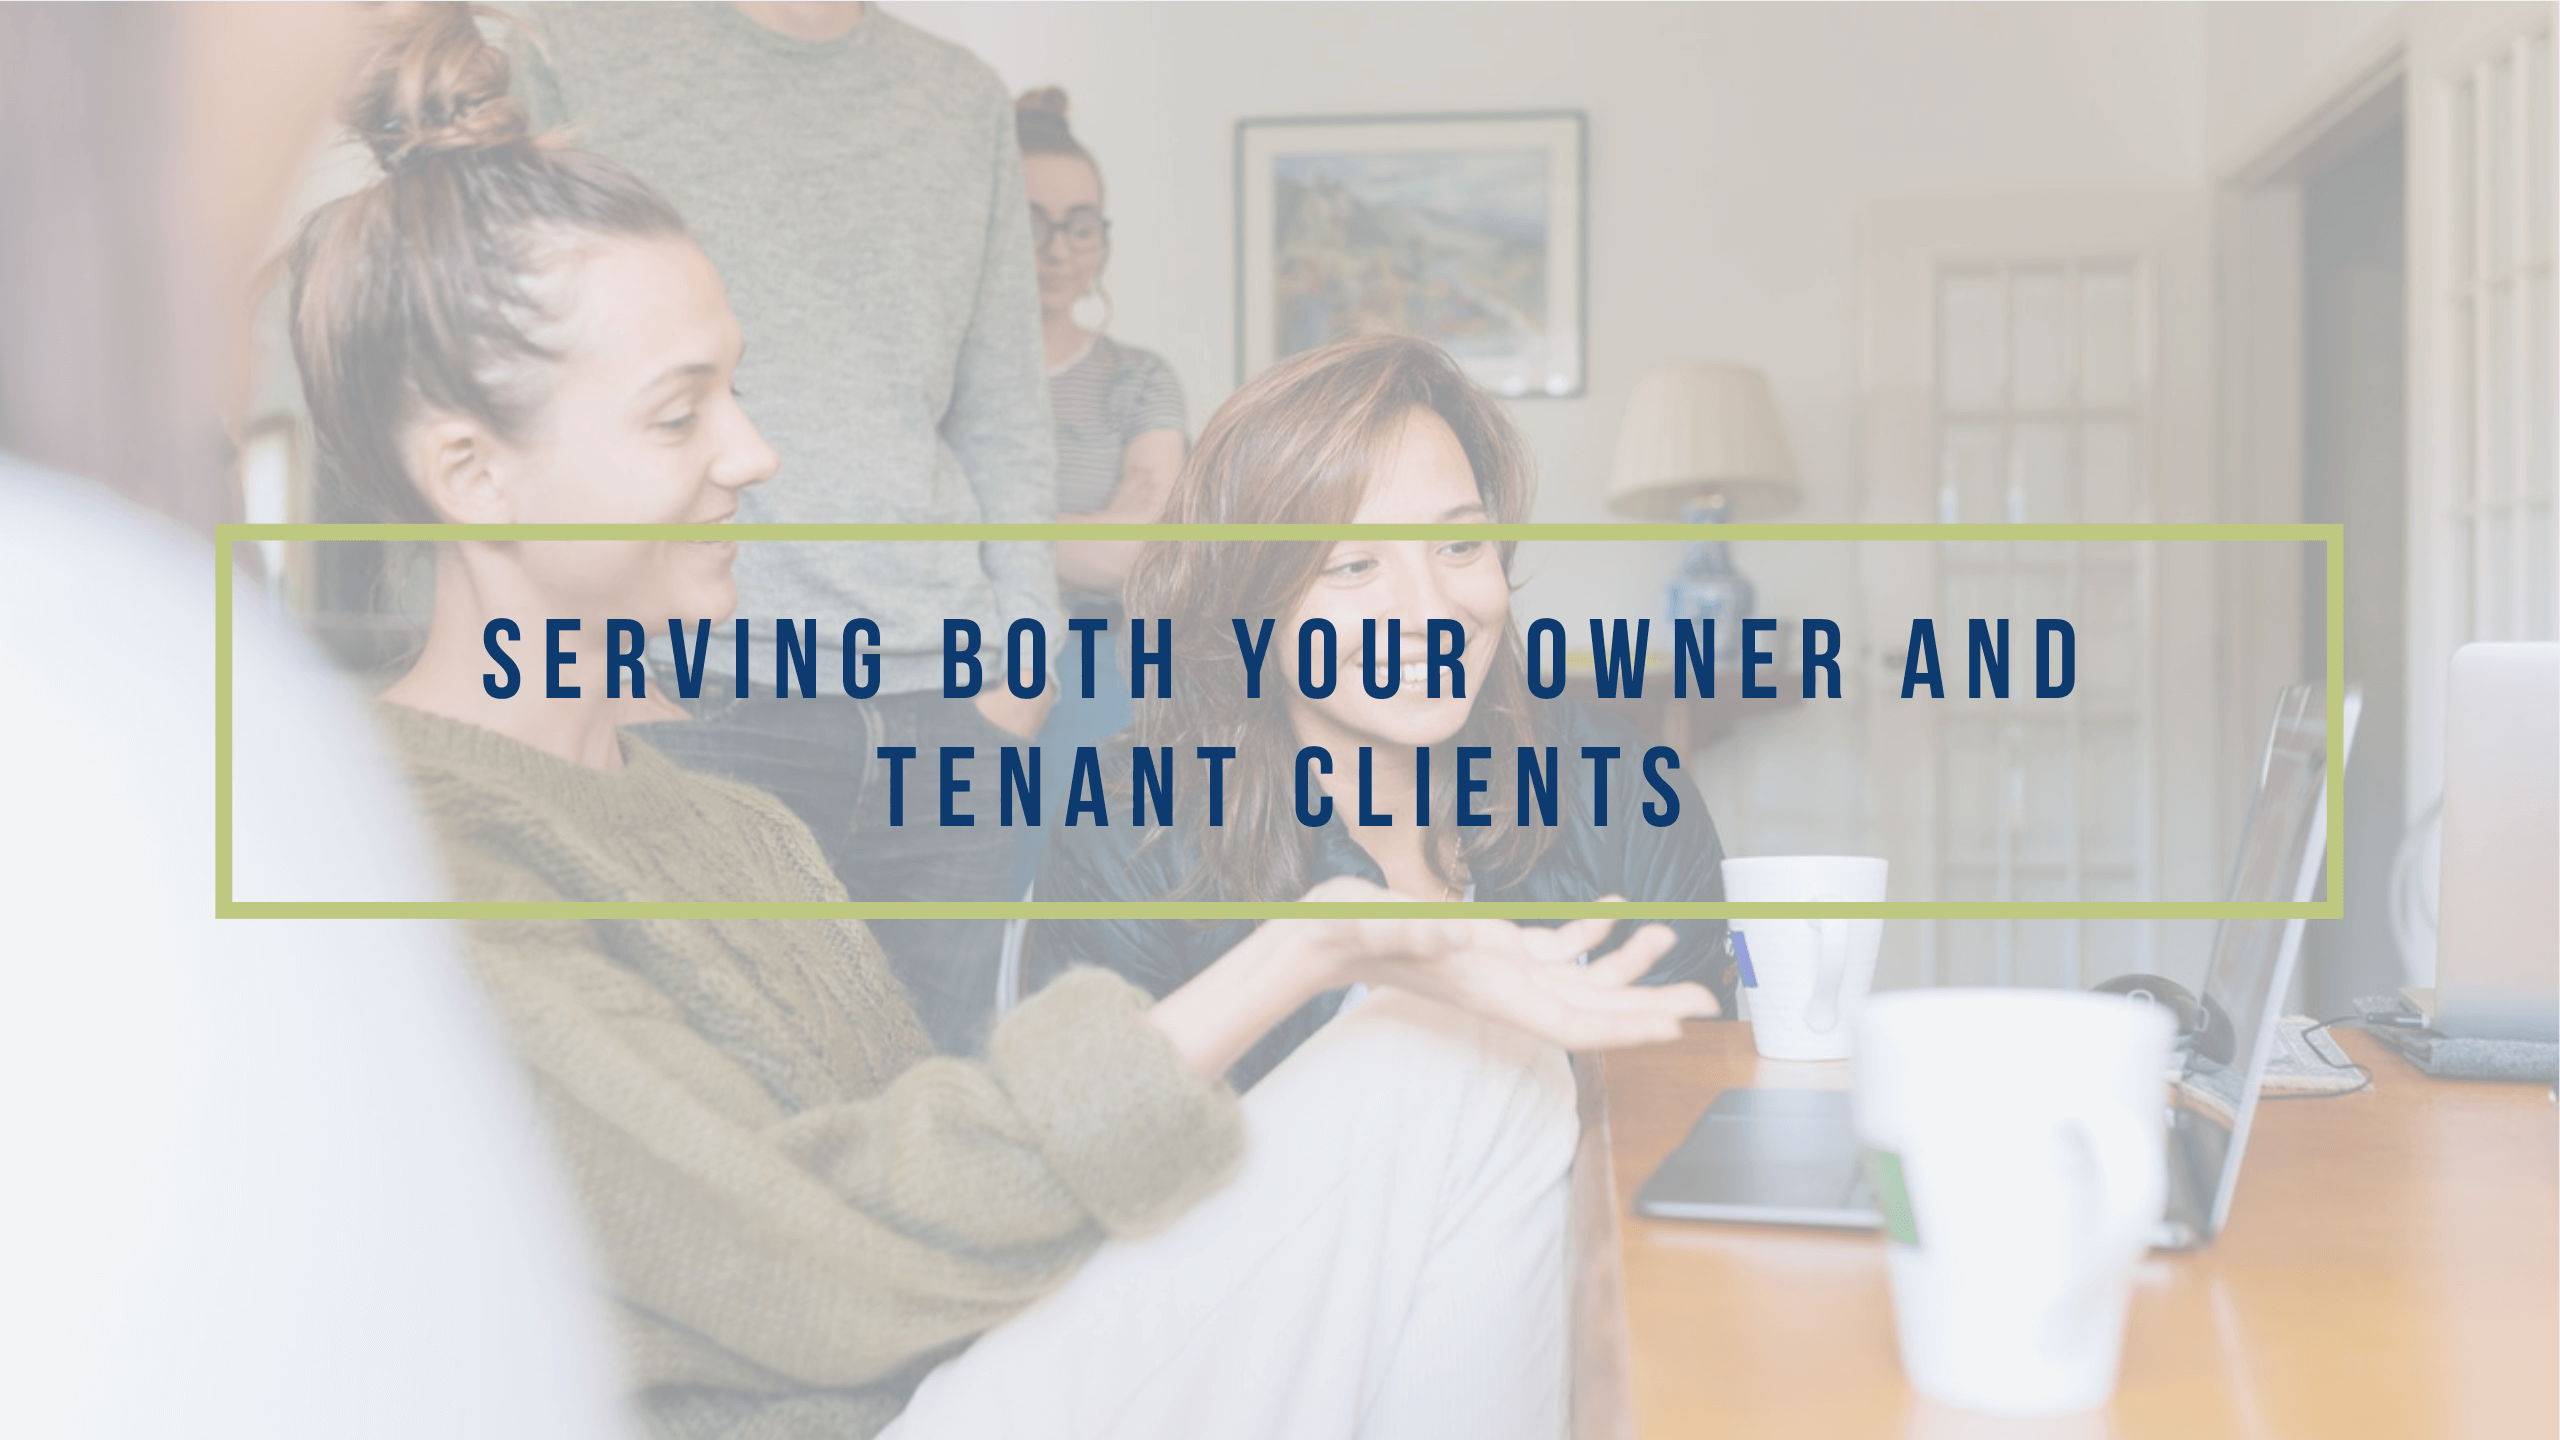 Serving Both Your Owner and Tenant Clients | Dayton Property Management Customer Service